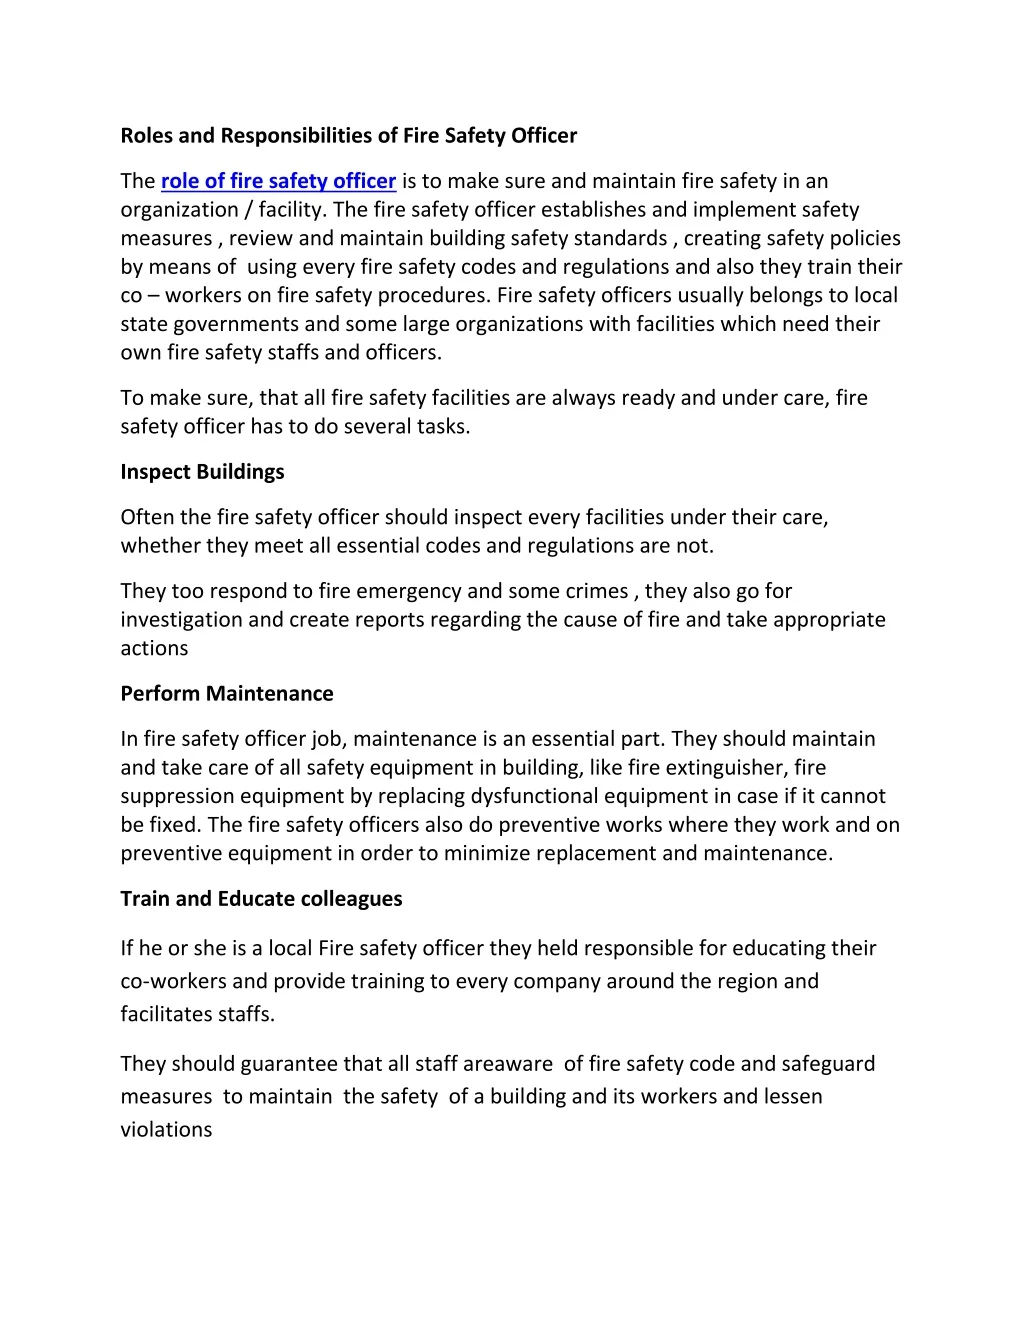 roles and responsibilities of fire safety officer